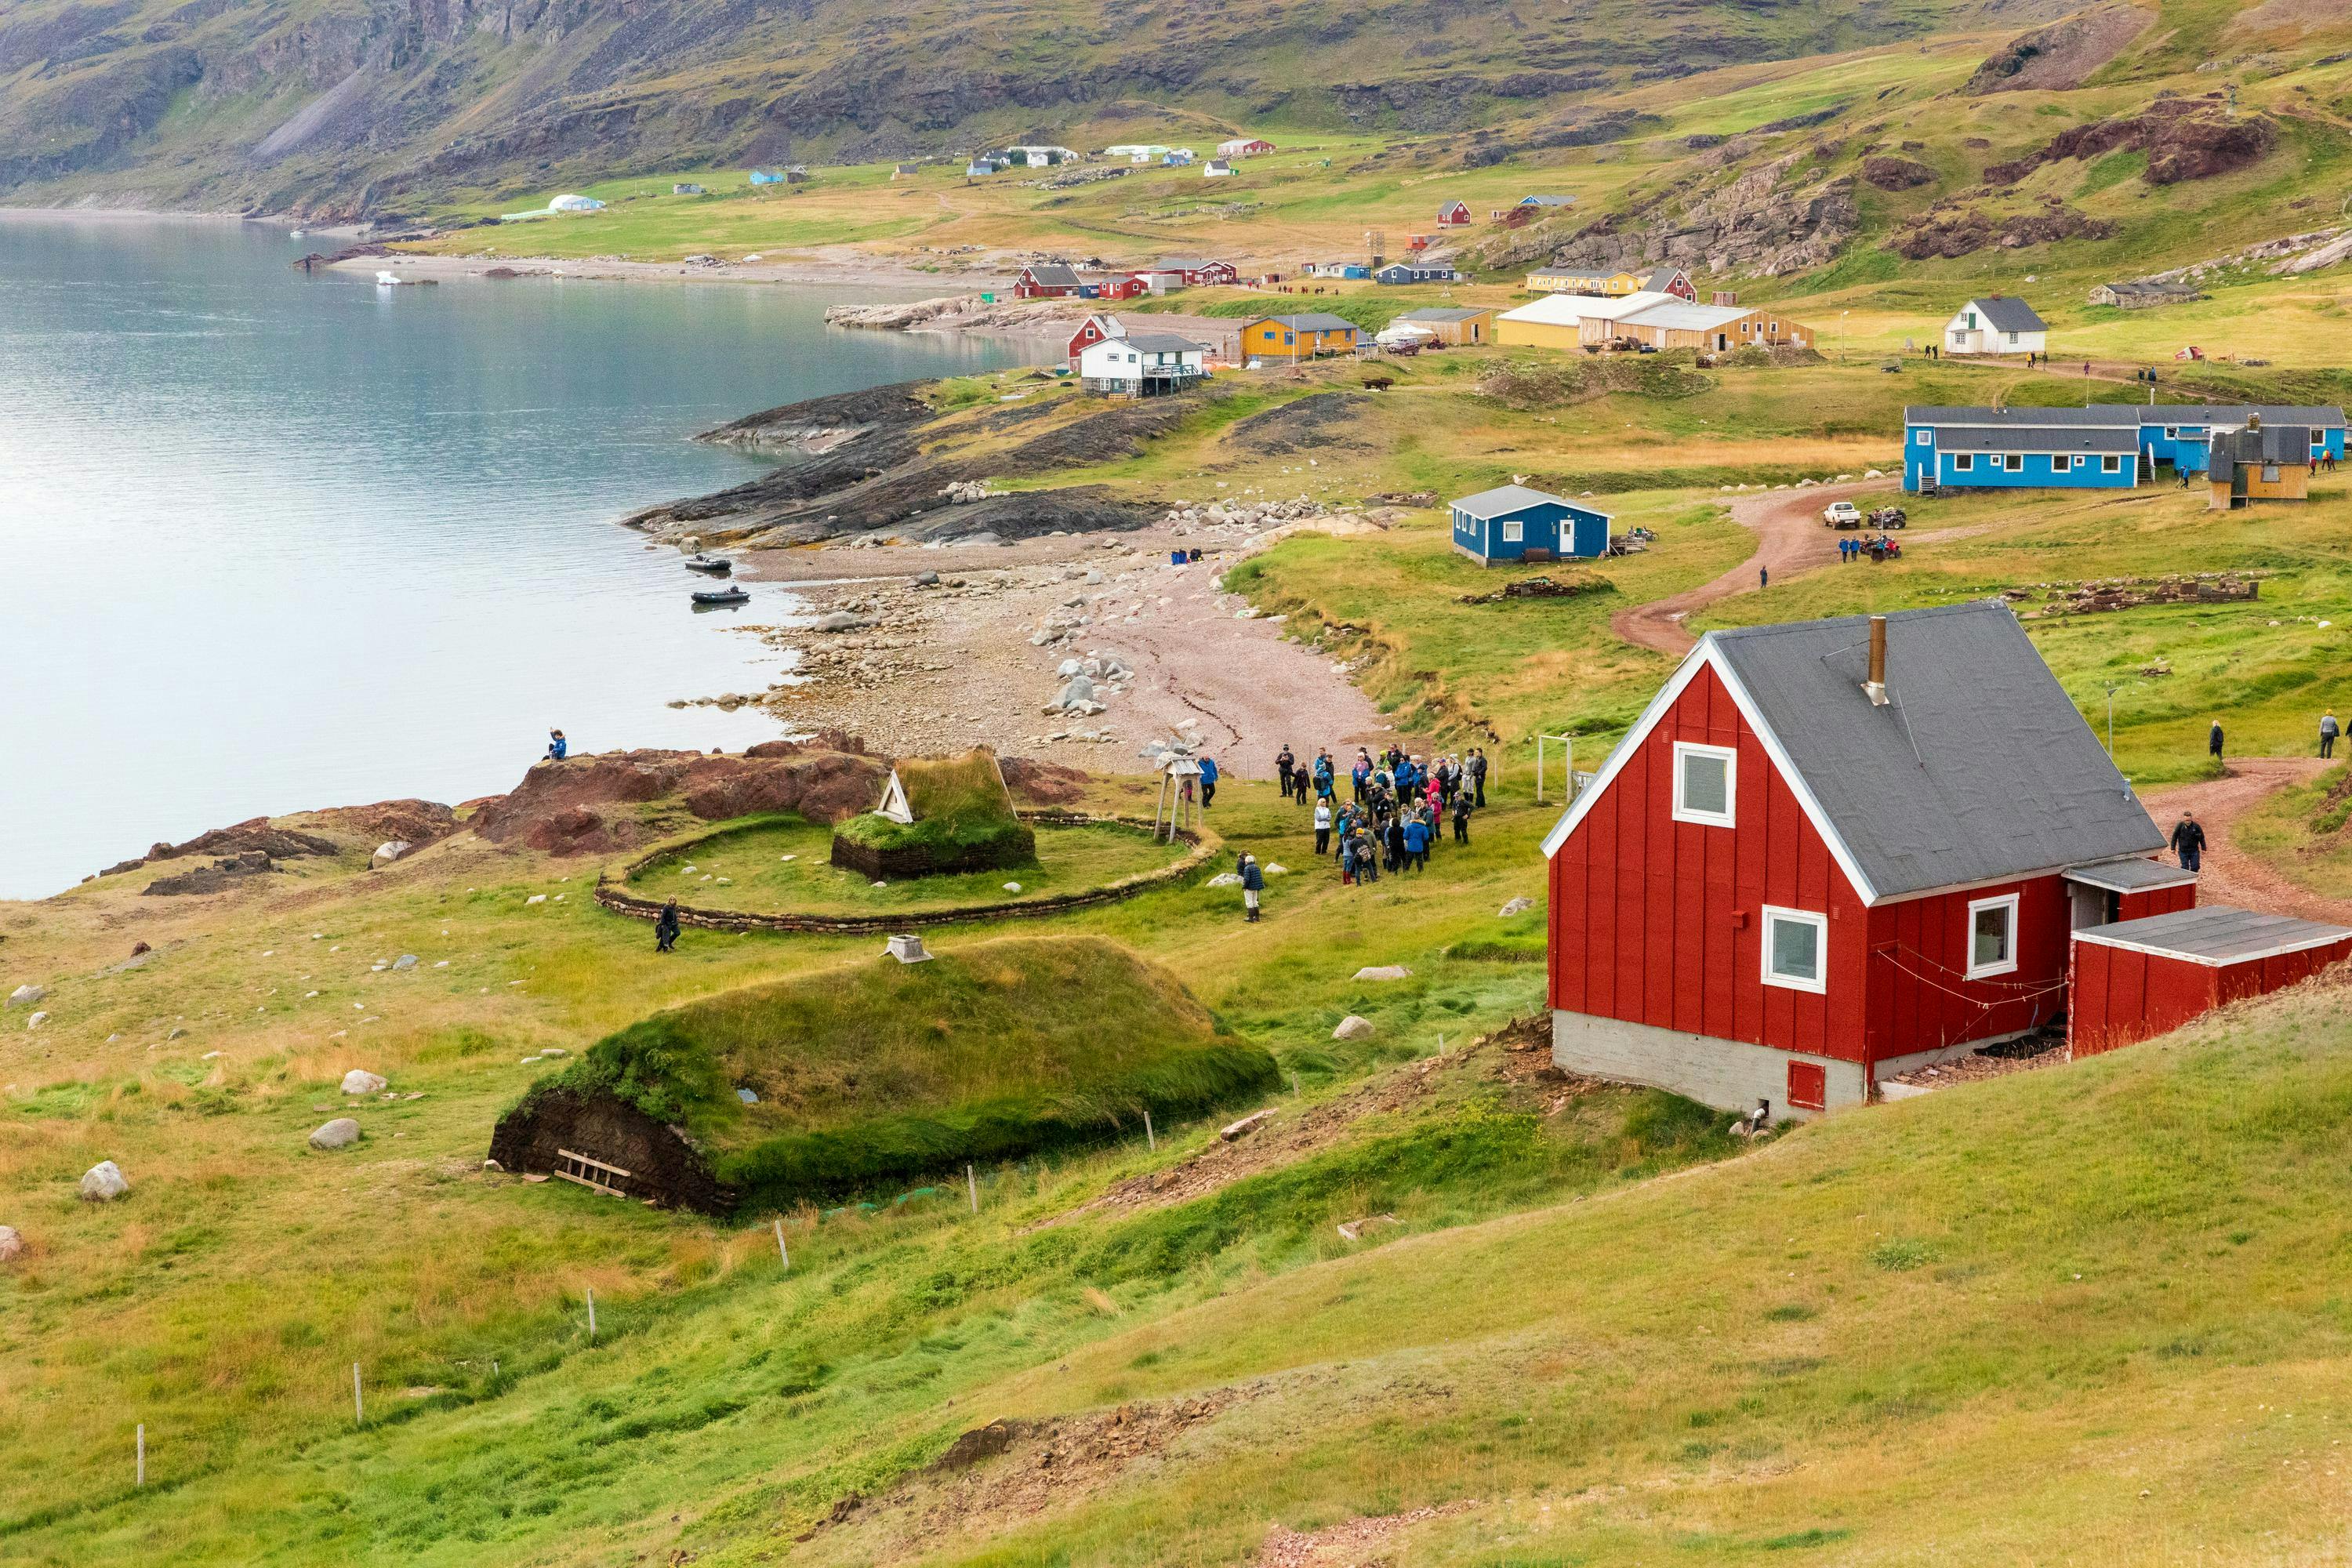 Guests visit Brattahlio, where Erik the Red established his farm in 982 A.D. after his exile from Iceland.